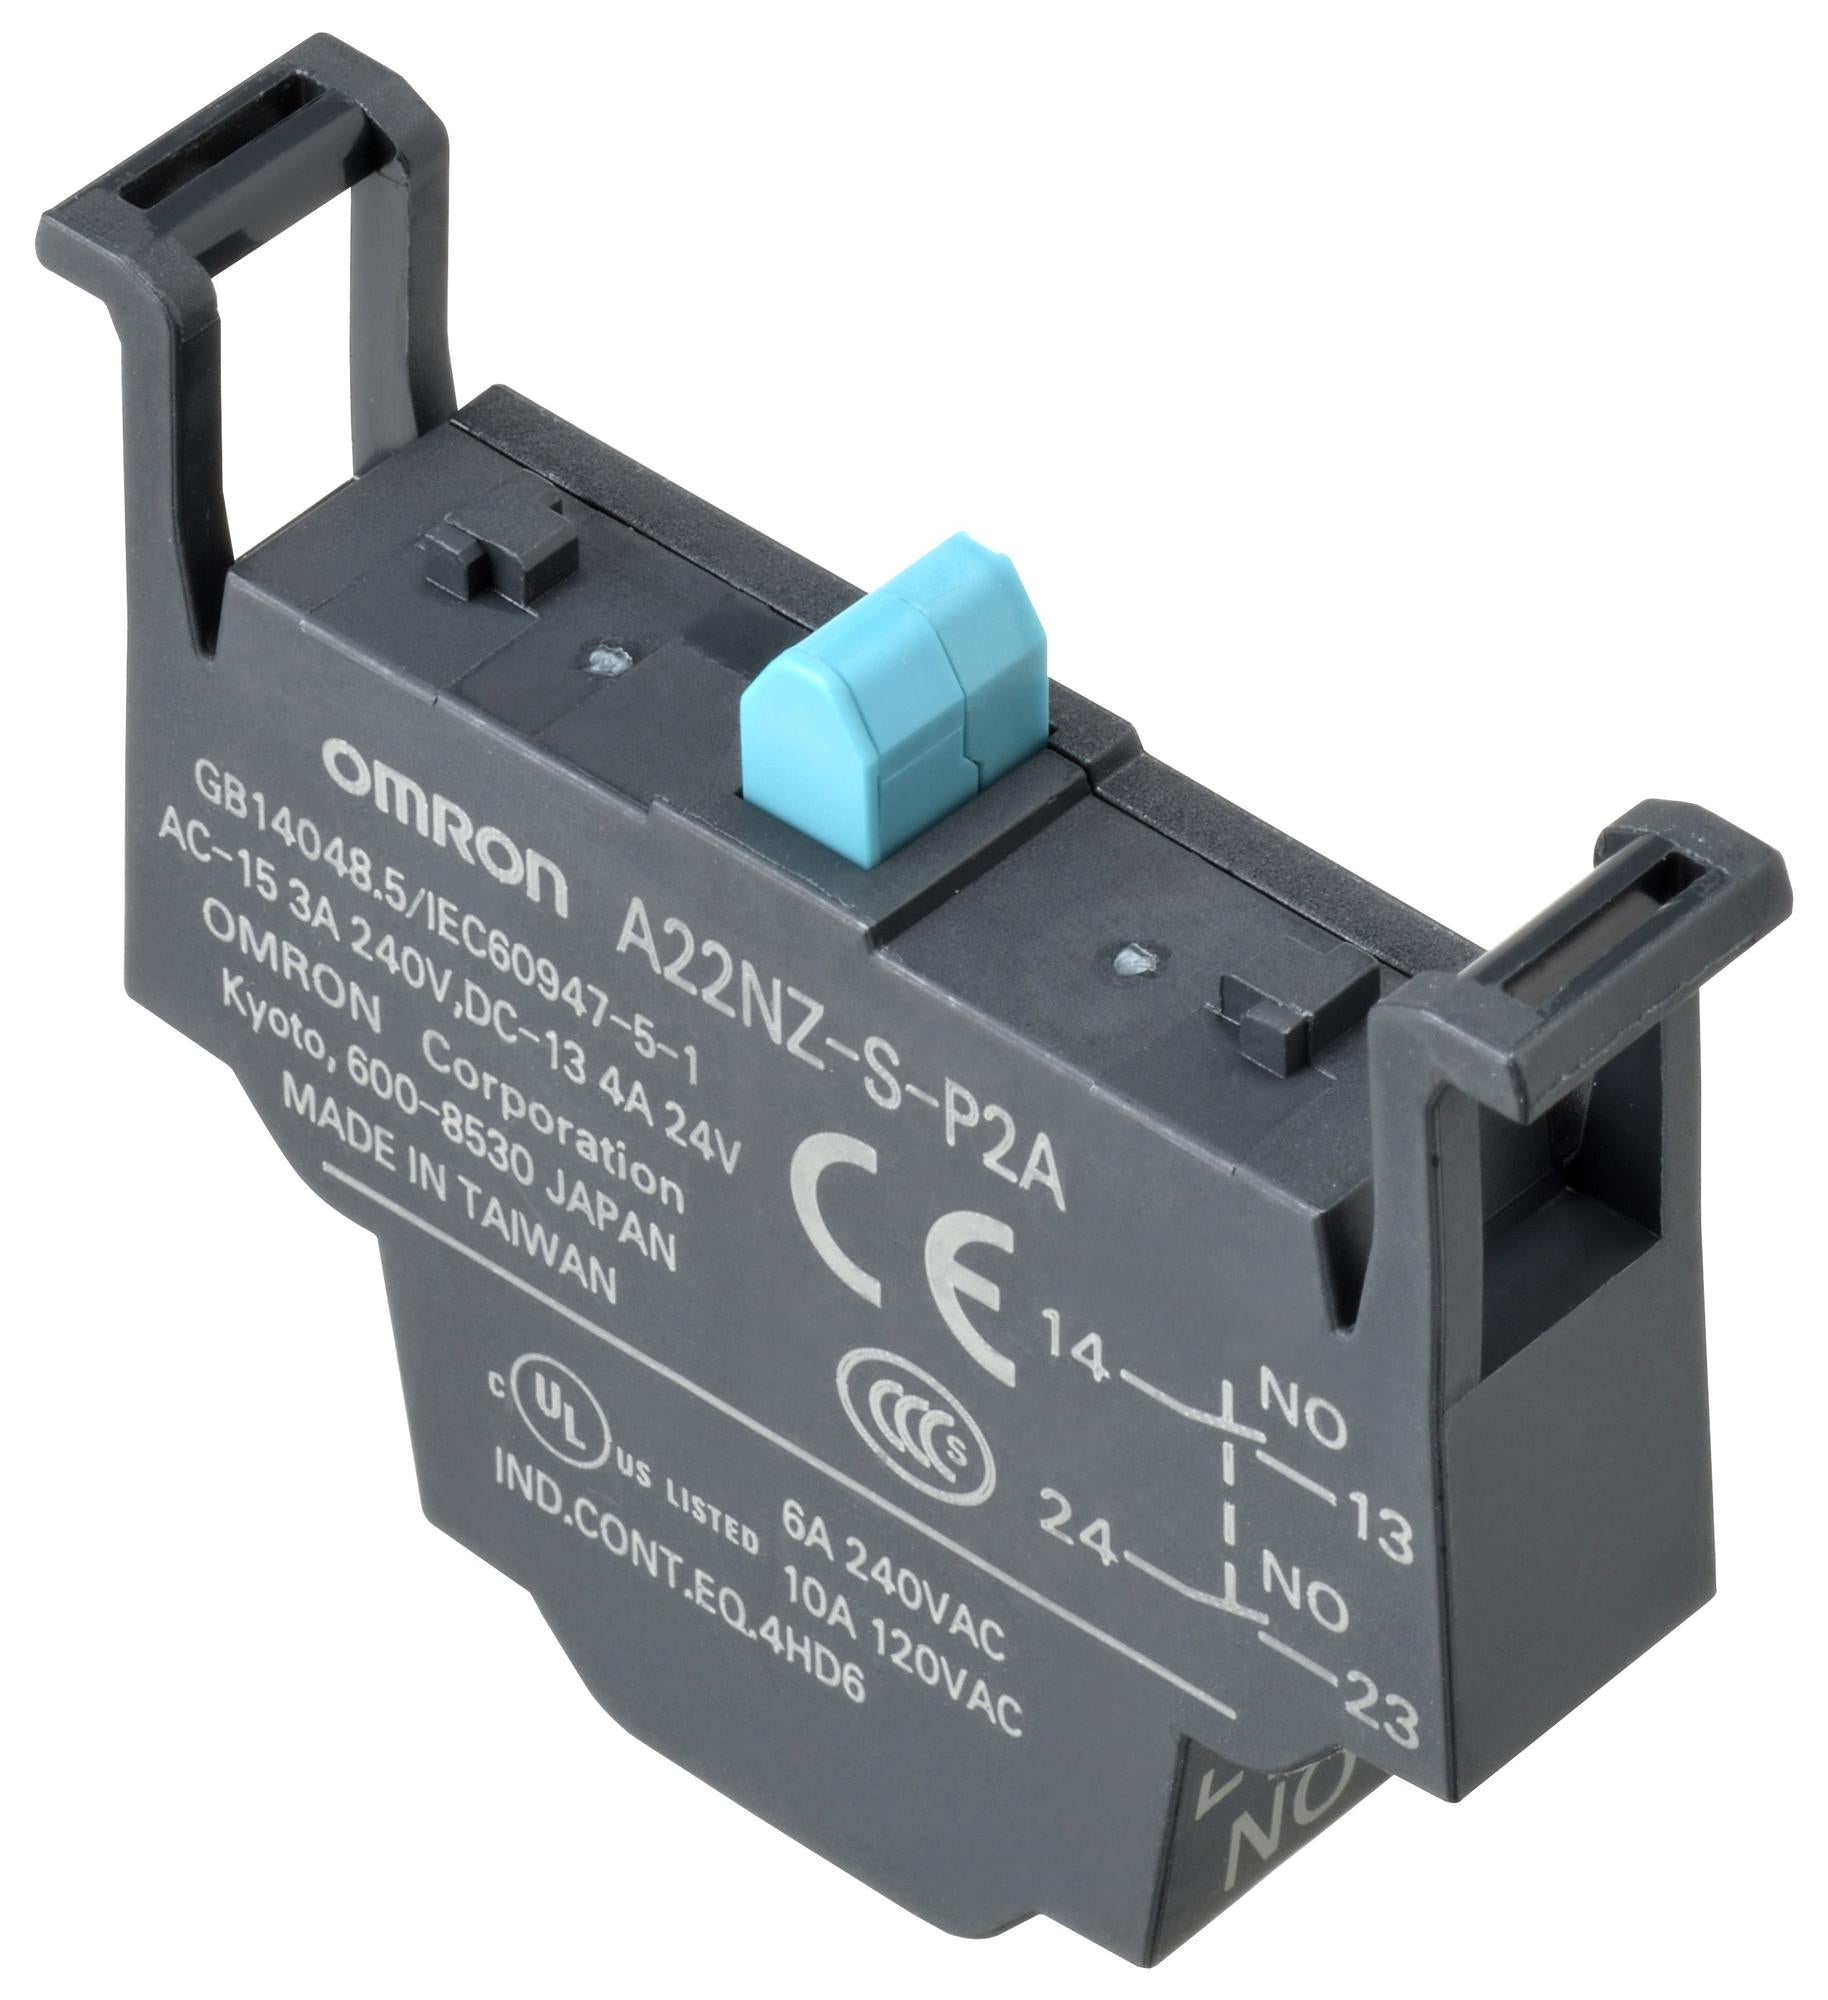 A22NZ-S-P2A CONTACT BLOCKS SWITCH COMPONENTS OMRON